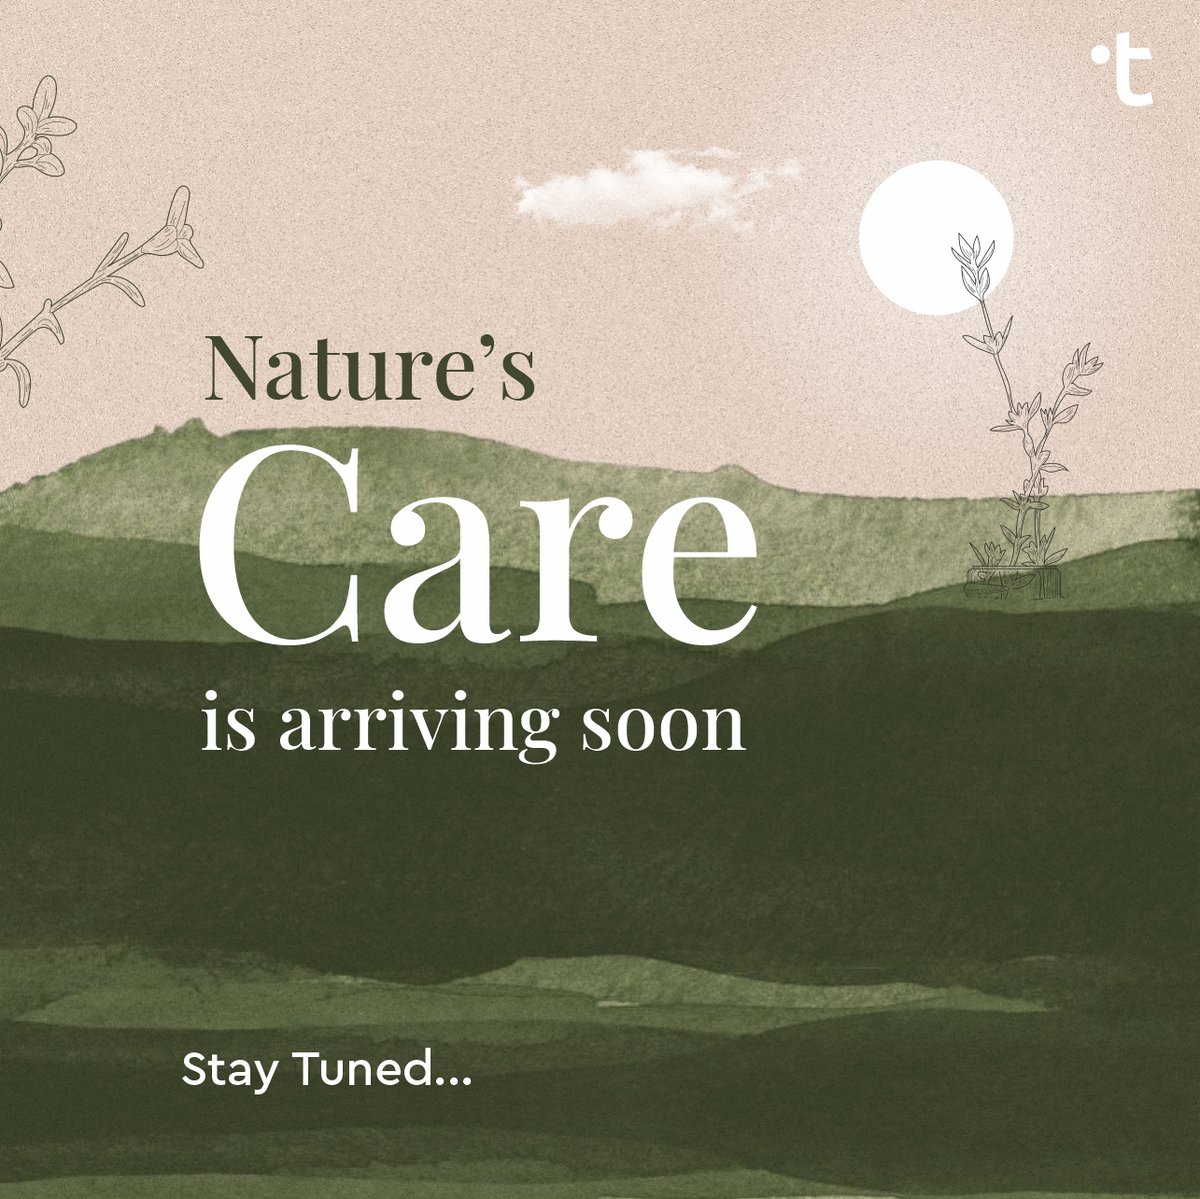 We have brought nature’s tender care for you. Stay tuned to feel it.
#twasacosmetics #twasa #cosmetics  #redefiningselfcare #selfcareclub #brightskin #happySkin #healthyskin #skinLove #pigmentationfree #suppleskin #softskin #skinGoals #pamperskin #nature #essence #comingsoon